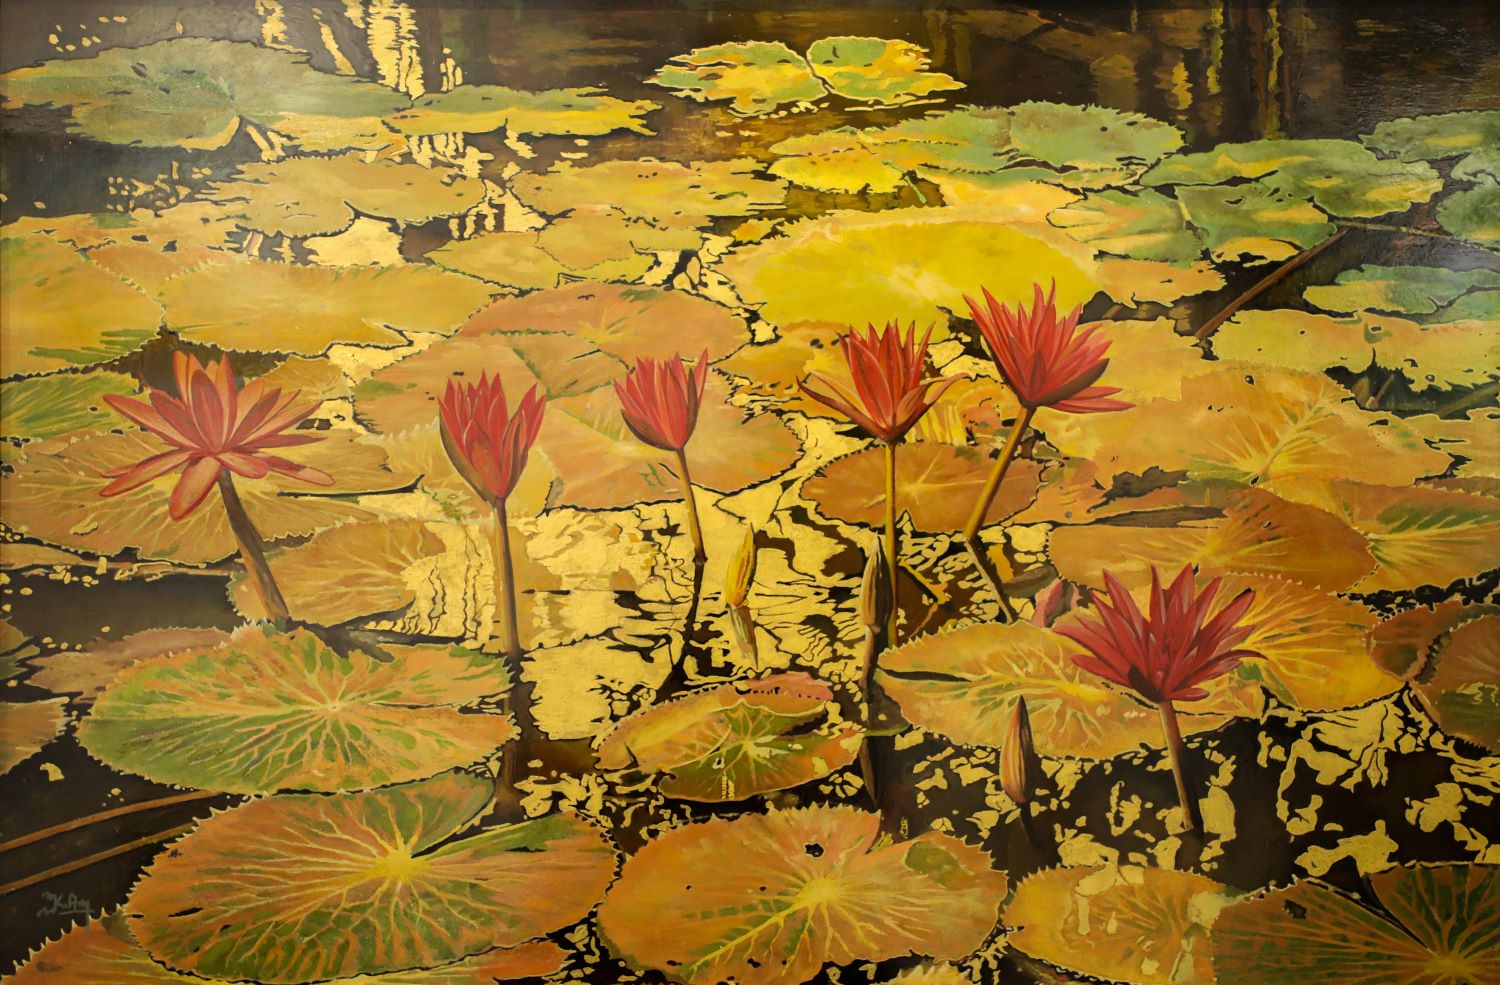 Noble Lotus II - Vietnamese Lacquer Painting by Artist Nguyen Xuan Viet